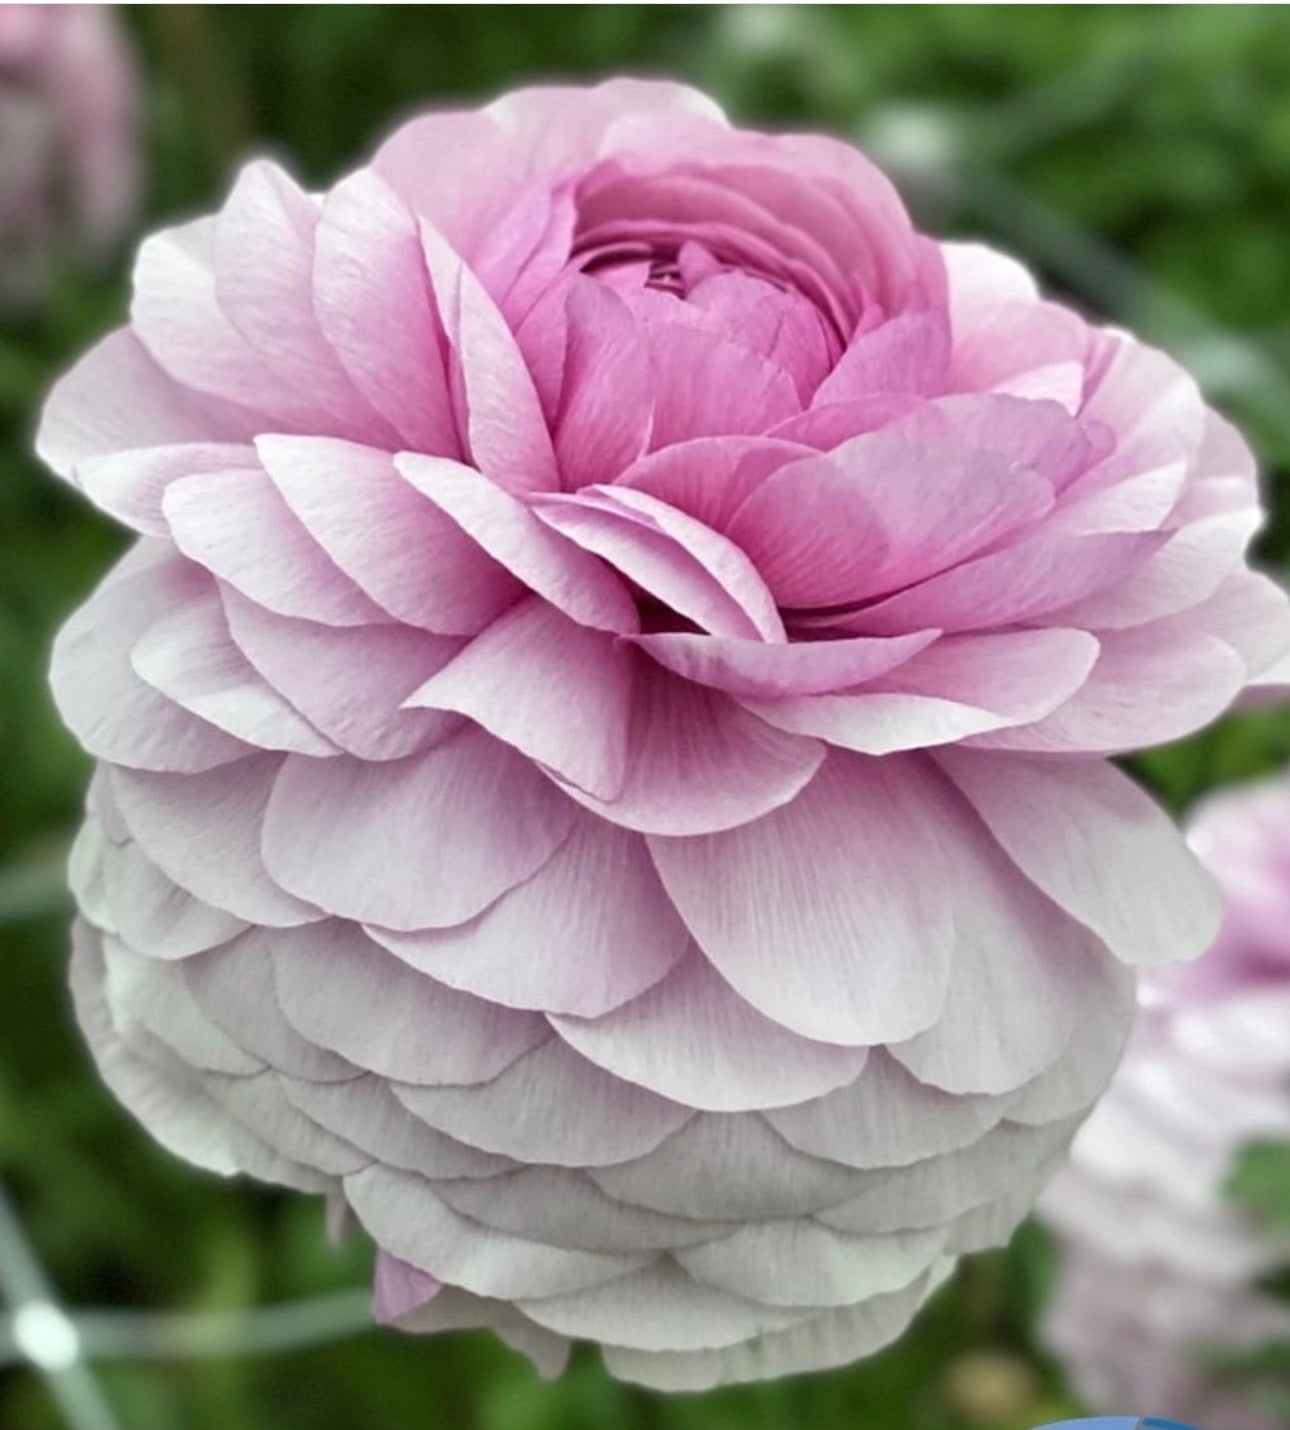 Ranunculus Elegance Milka - 20 corms - Available Now